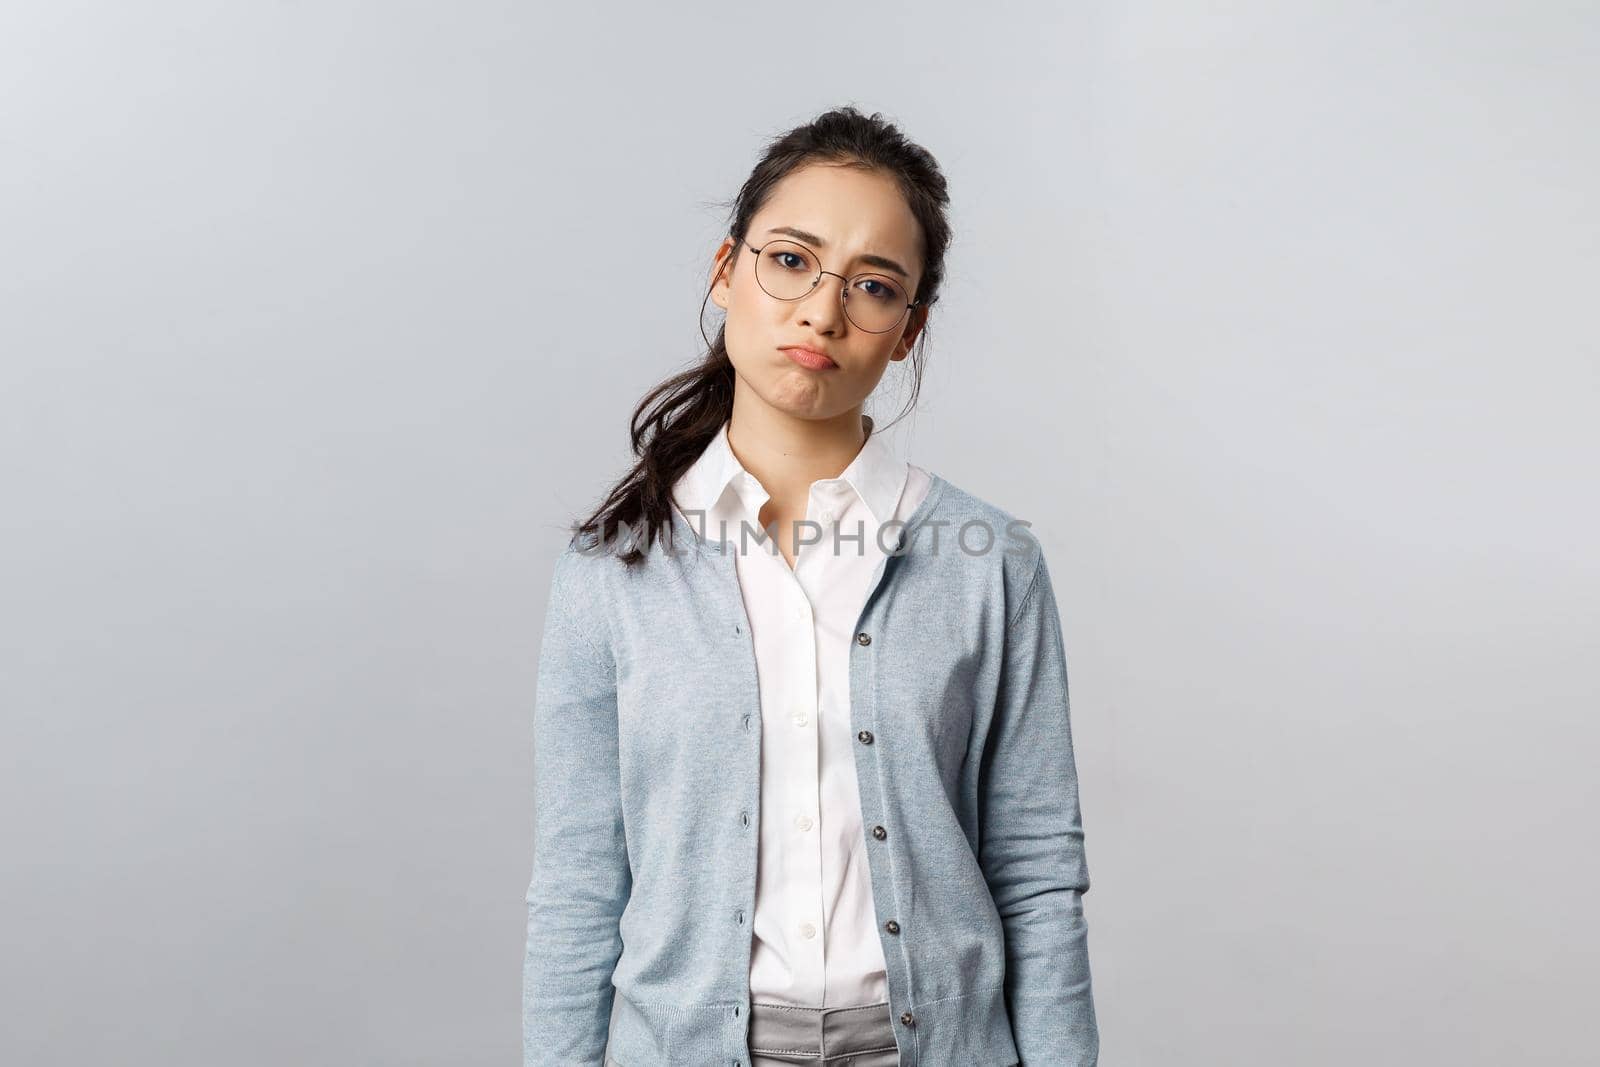 Portrait of sighing displeased and gloomy young asian girl in glasses, pouting and looking disappointed camera, express regret or feel uneasy over failure at work, grey background.